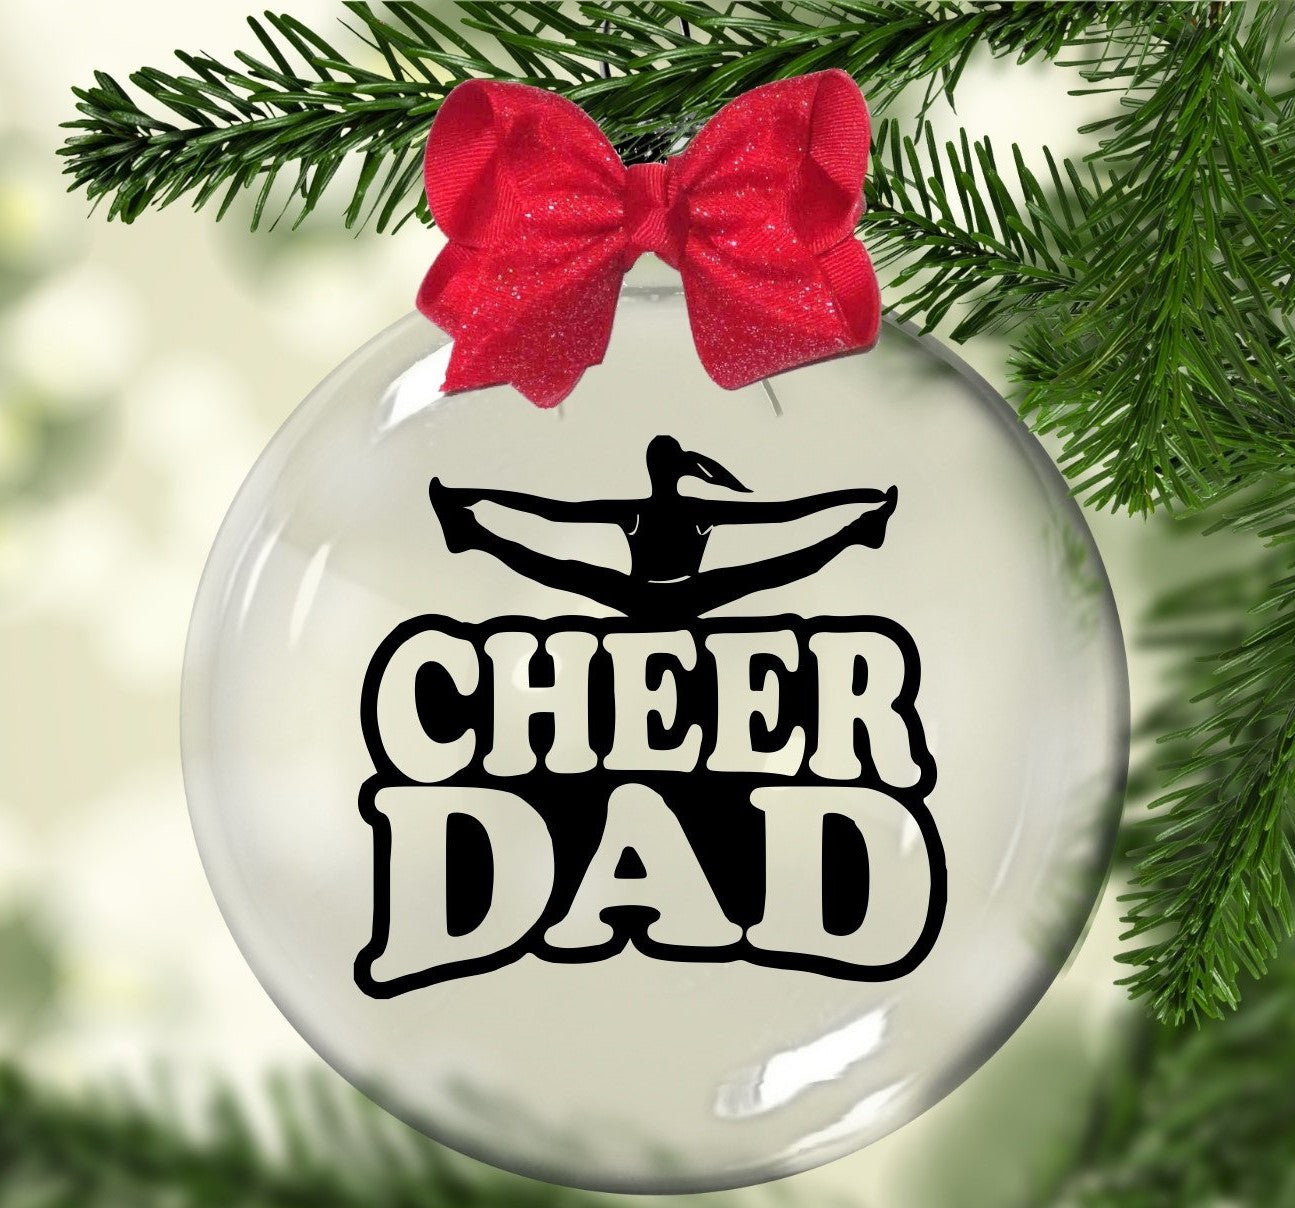 Cheer Dad Floating Ornament